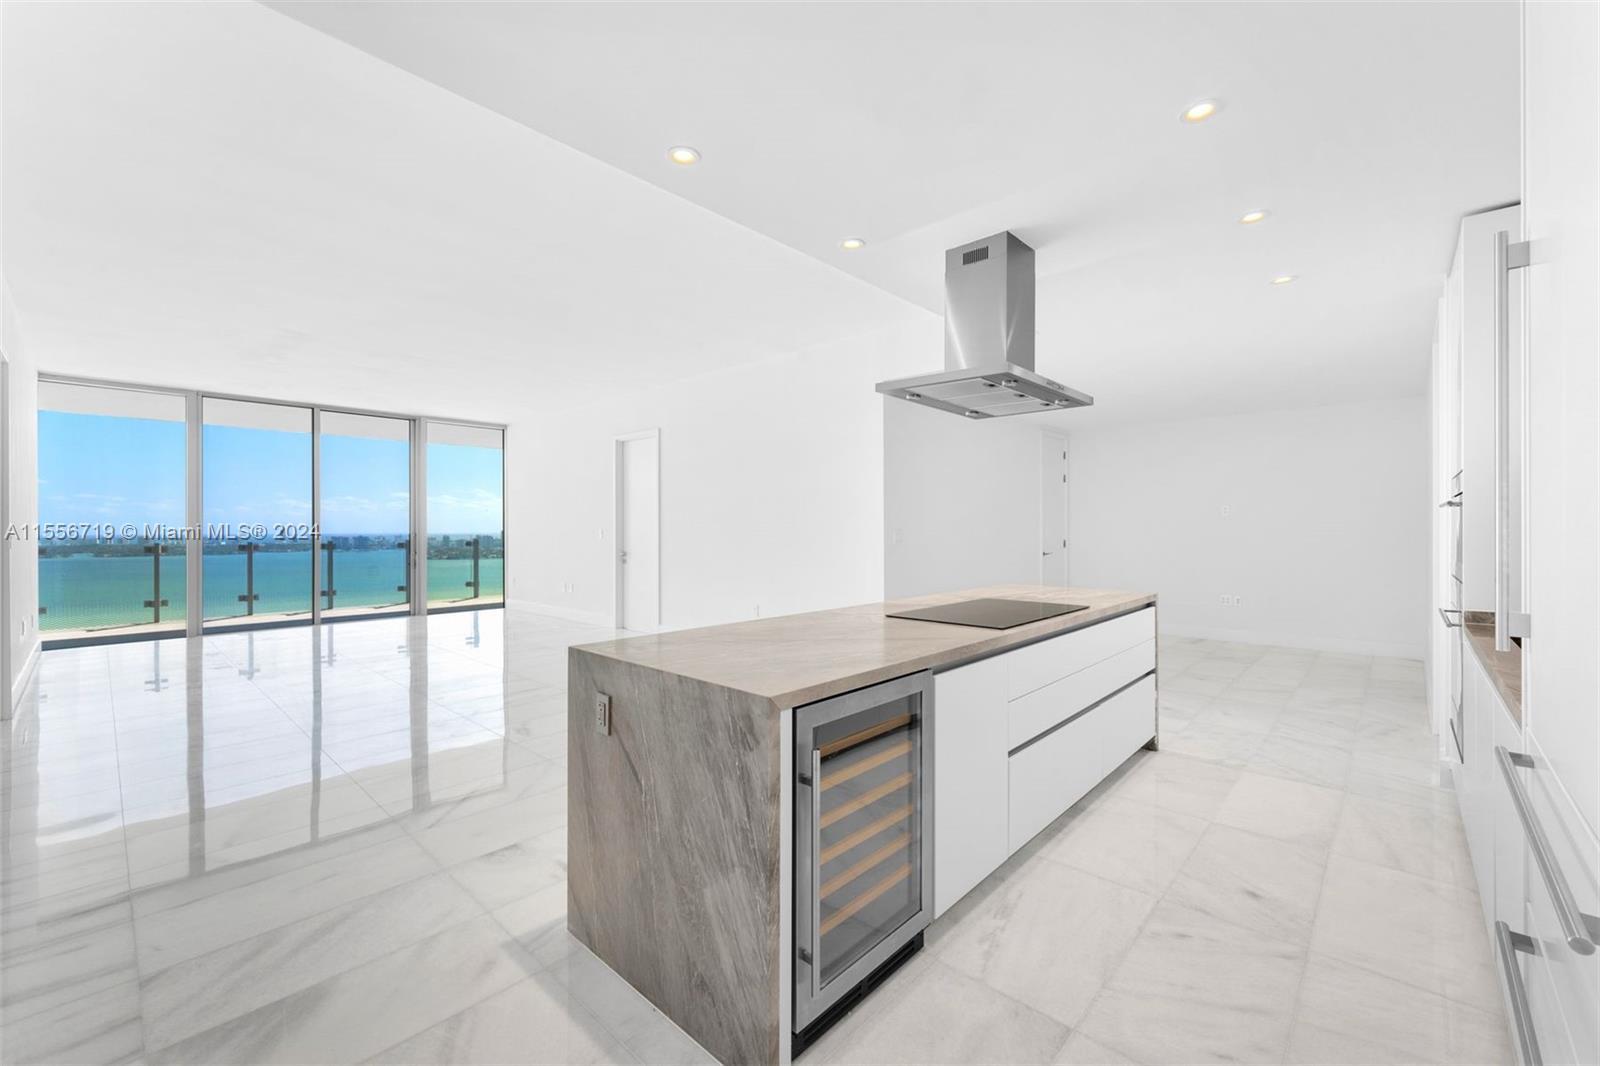 Experience unparalleled luxury living in the heart of Edgewater with unobstructed bay views at the n